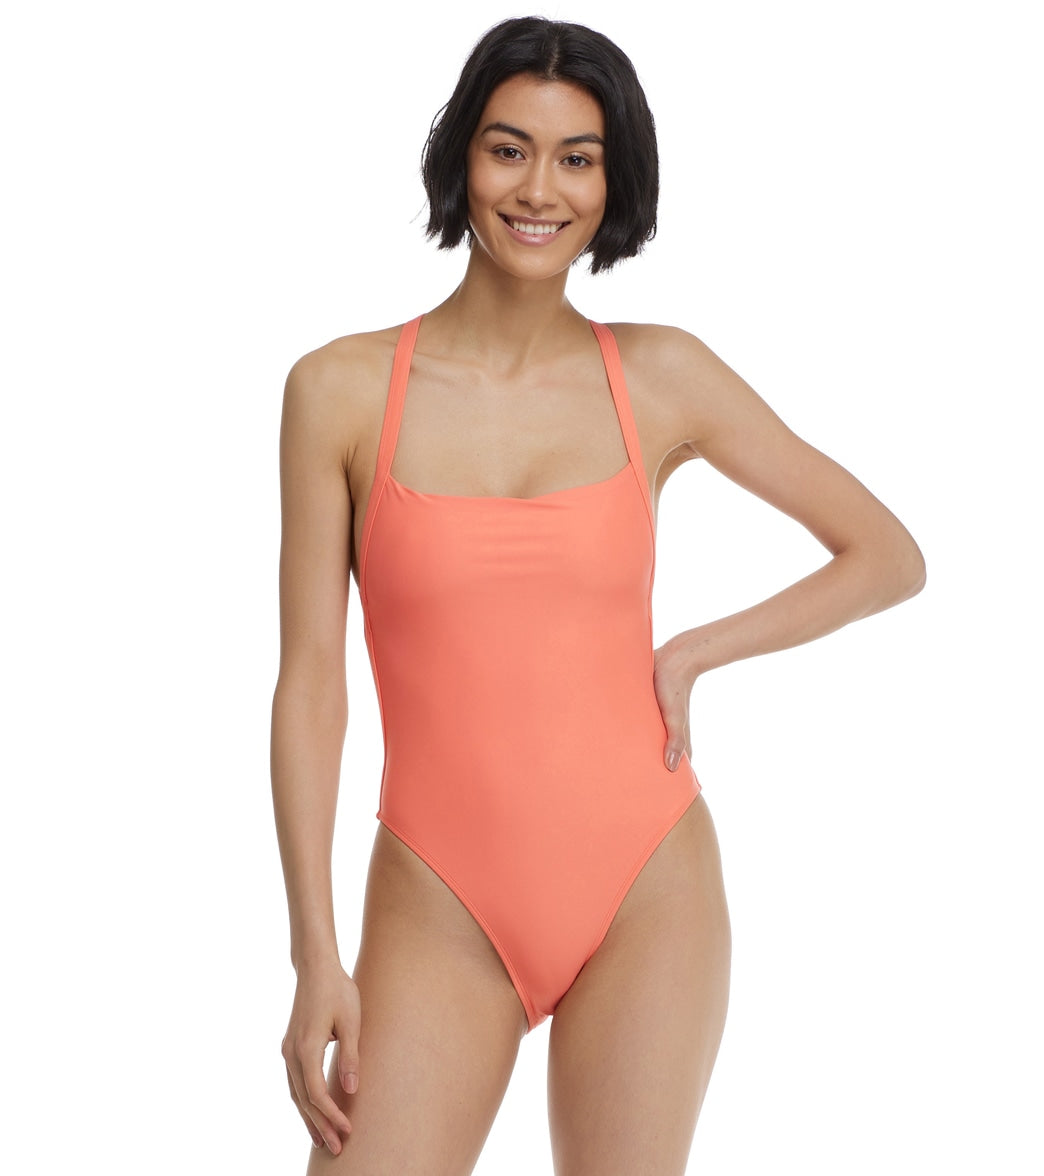 Body Glove Smoothies Electra One Piece Swimsuit